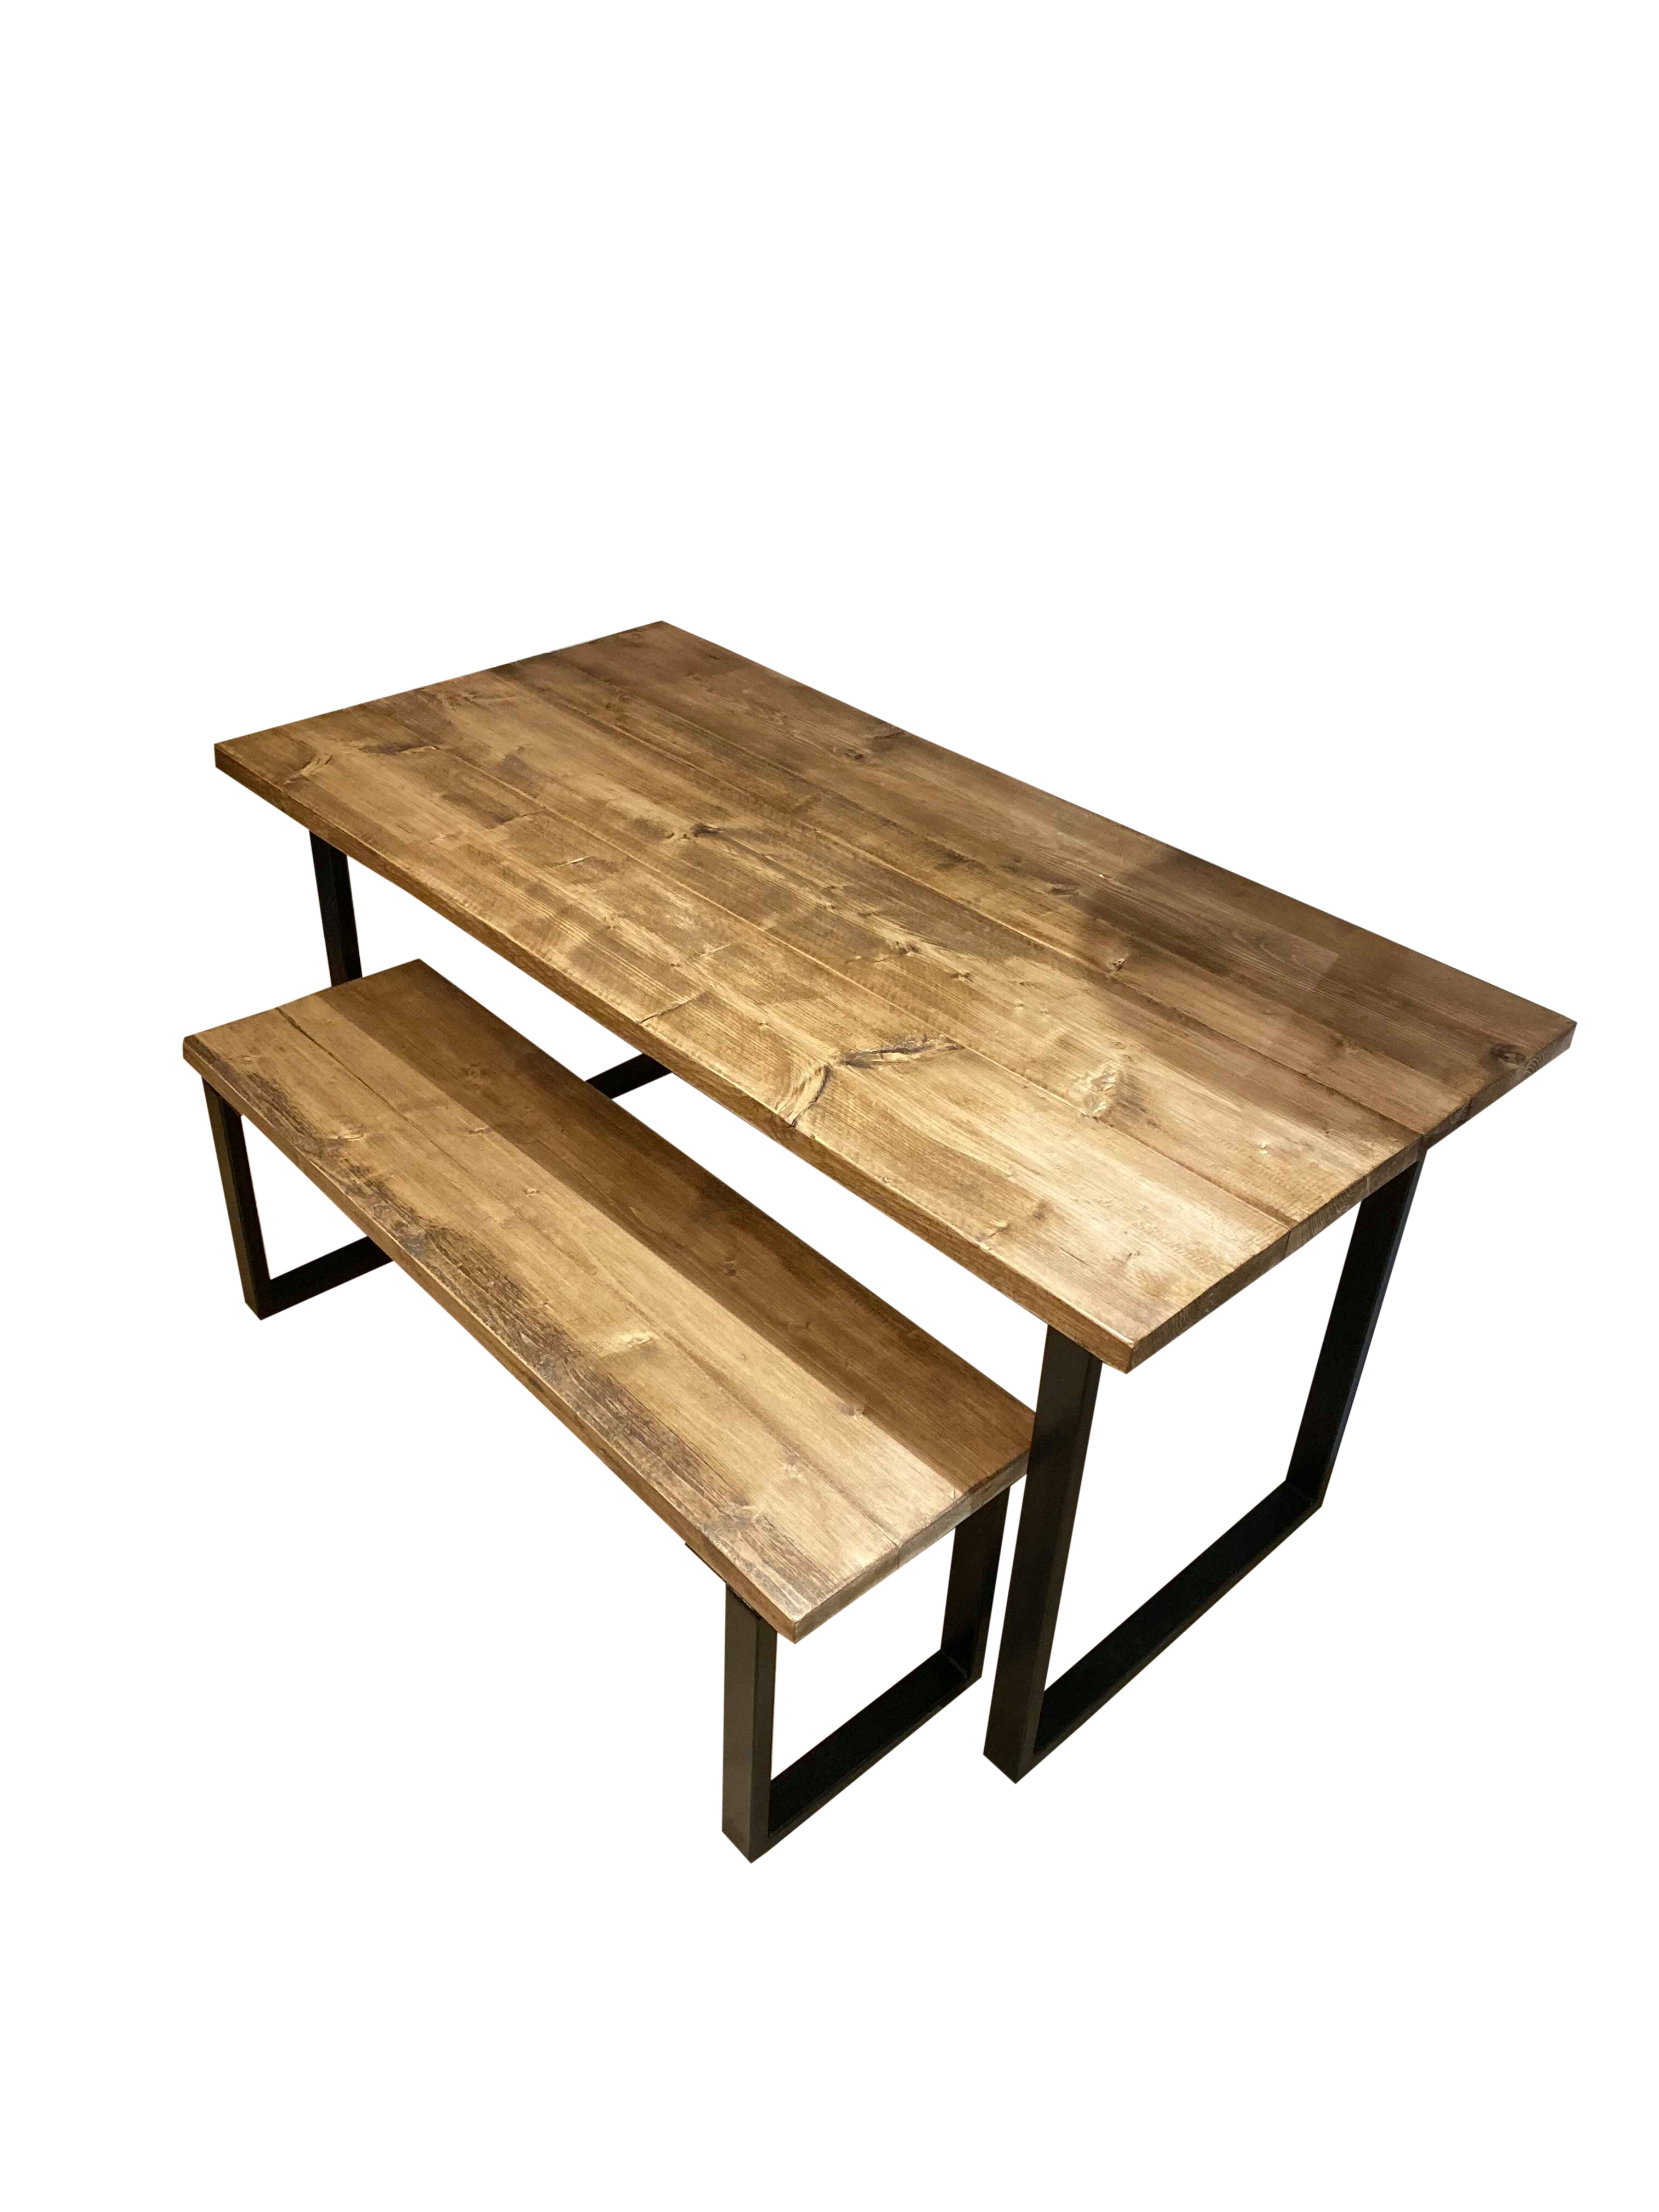 Reclaimed Wood Dining Table By Brockley, Reclaimed Wood And Metal Dining Table